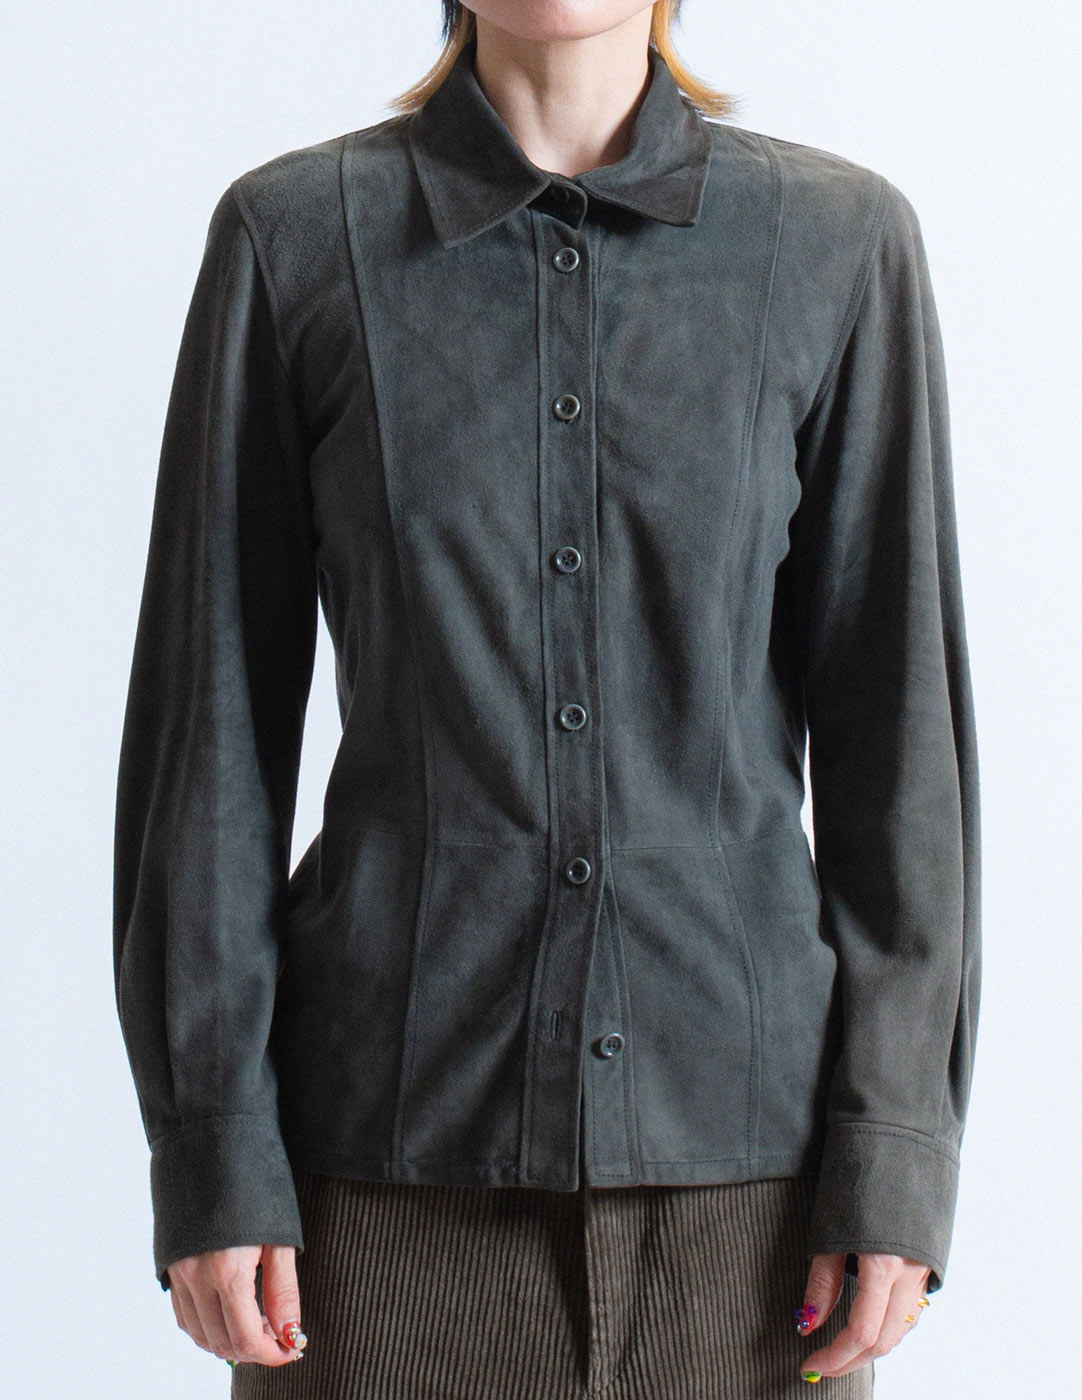 Loewe vintage charcoal suede leather shirt front detail